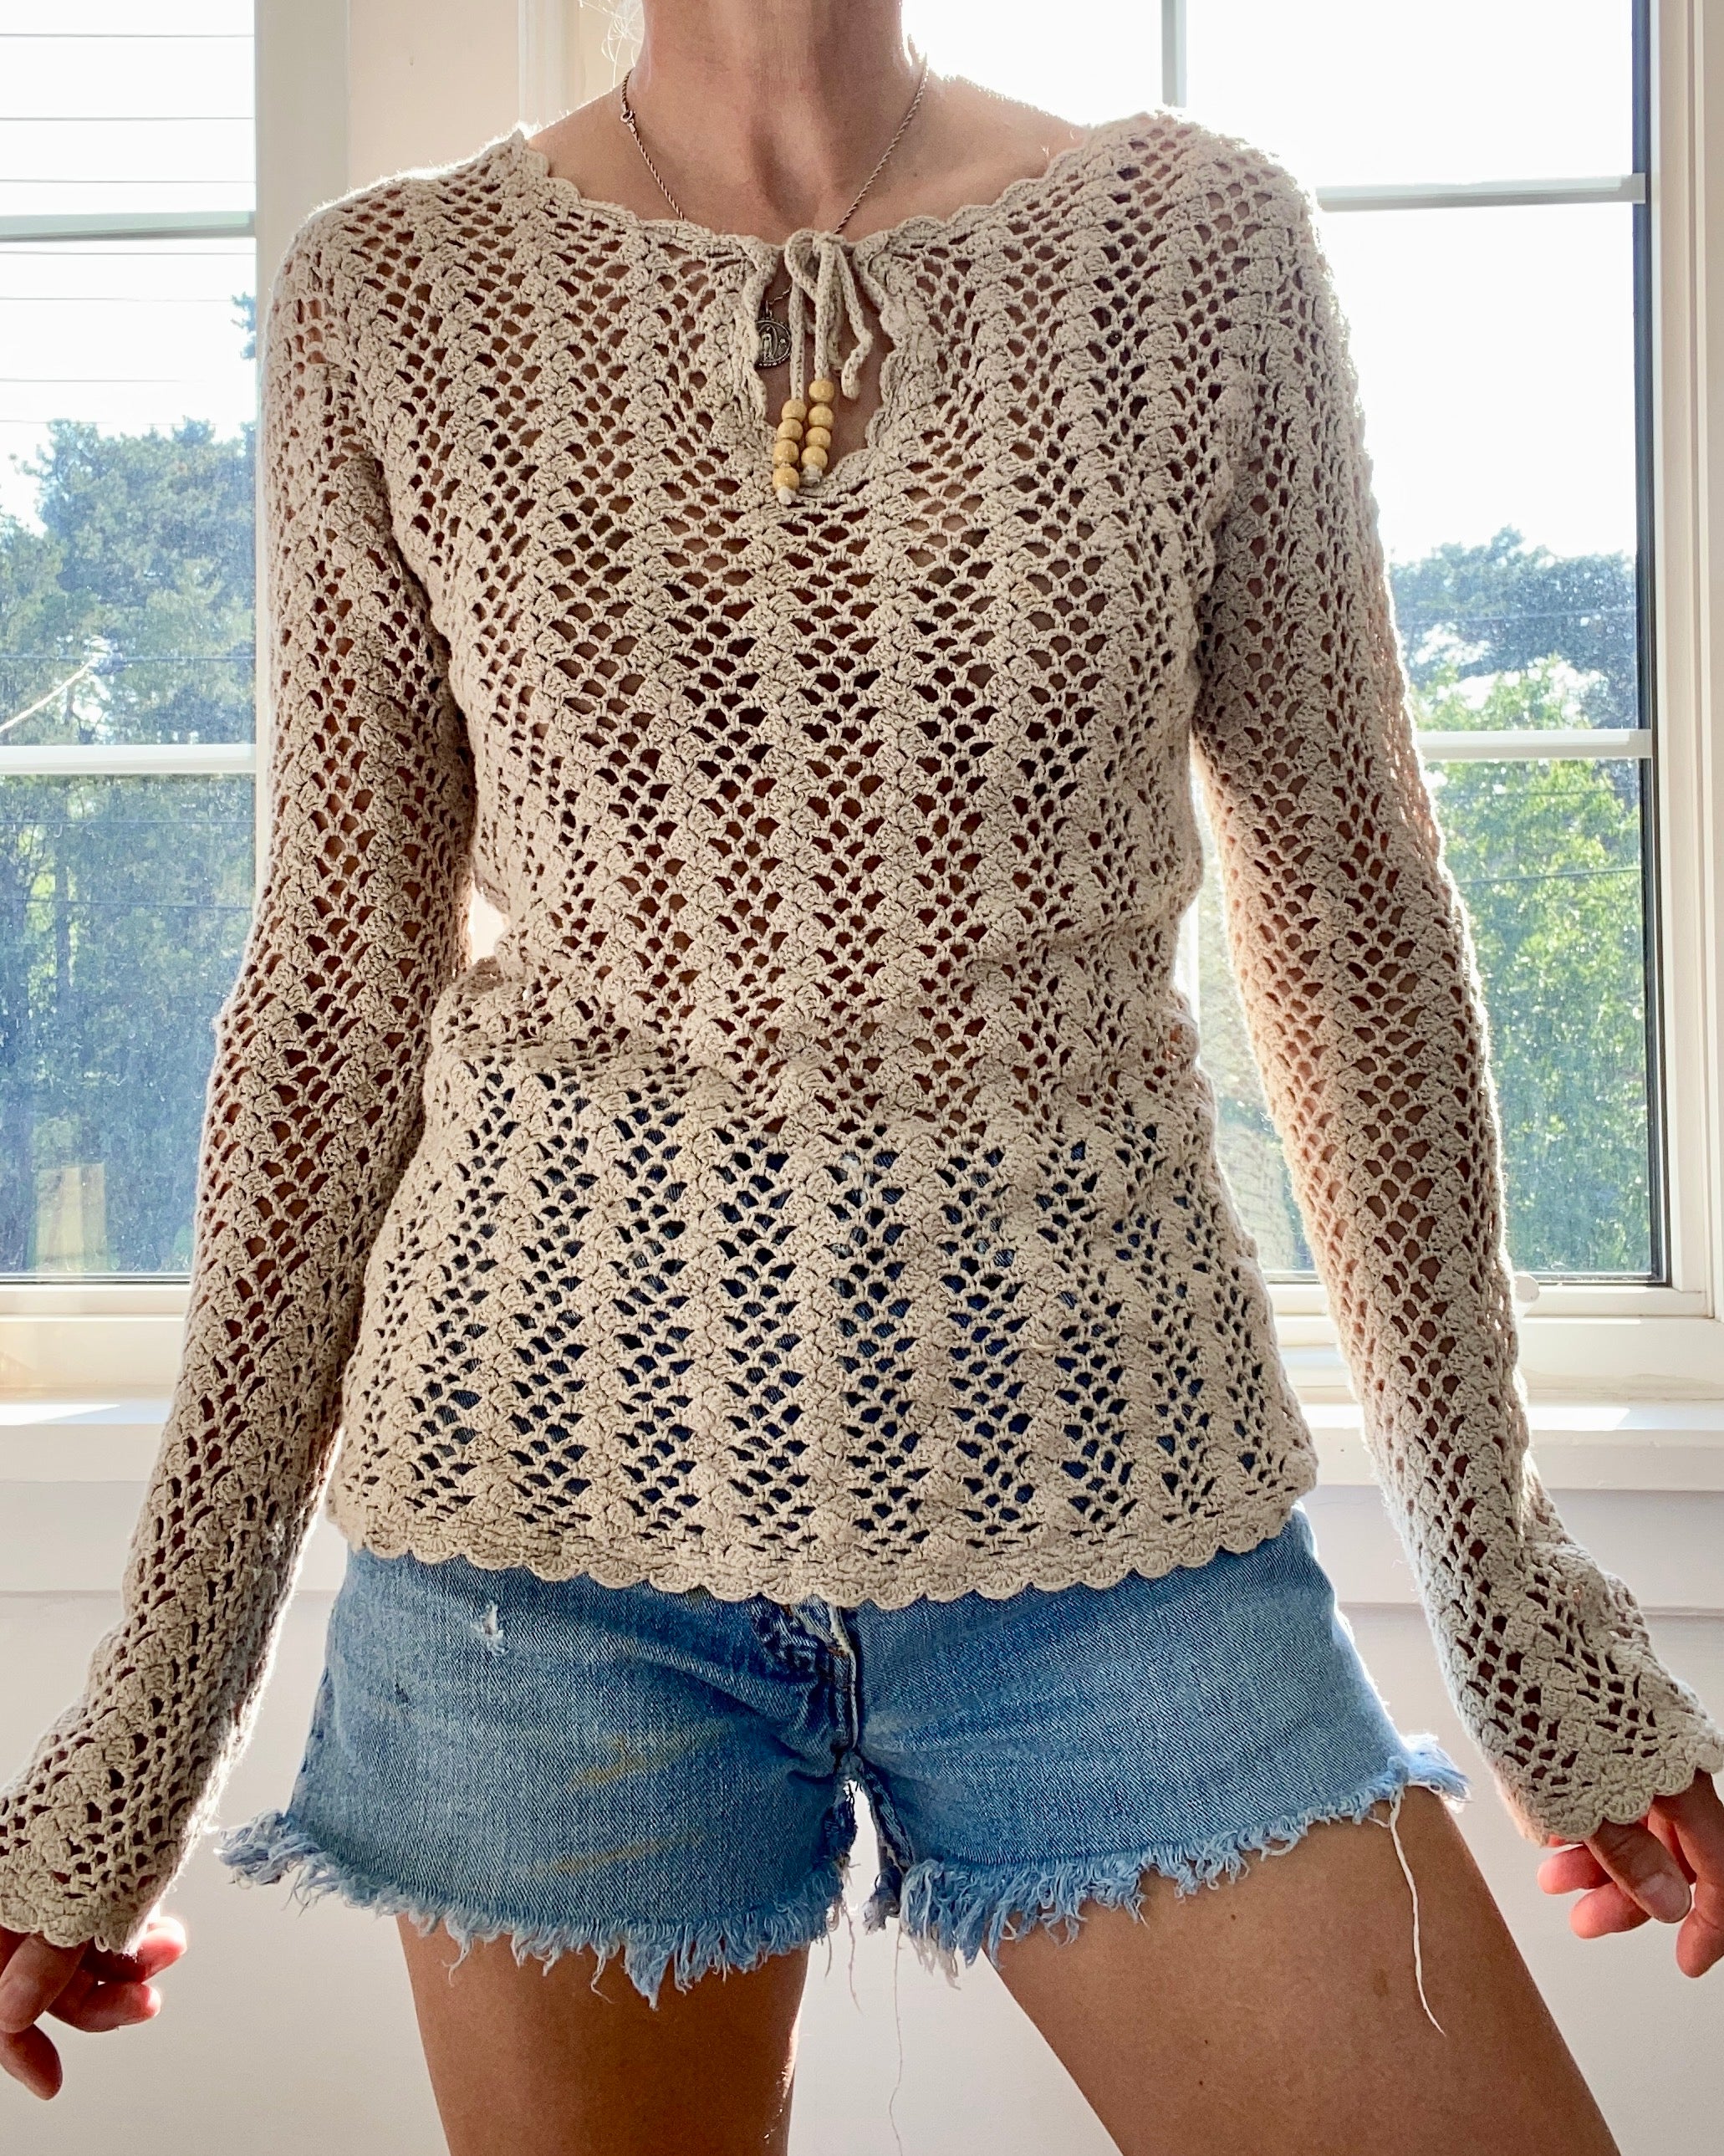 VINTAGE Tan Cotton Crochet Top With Bell Sleeves